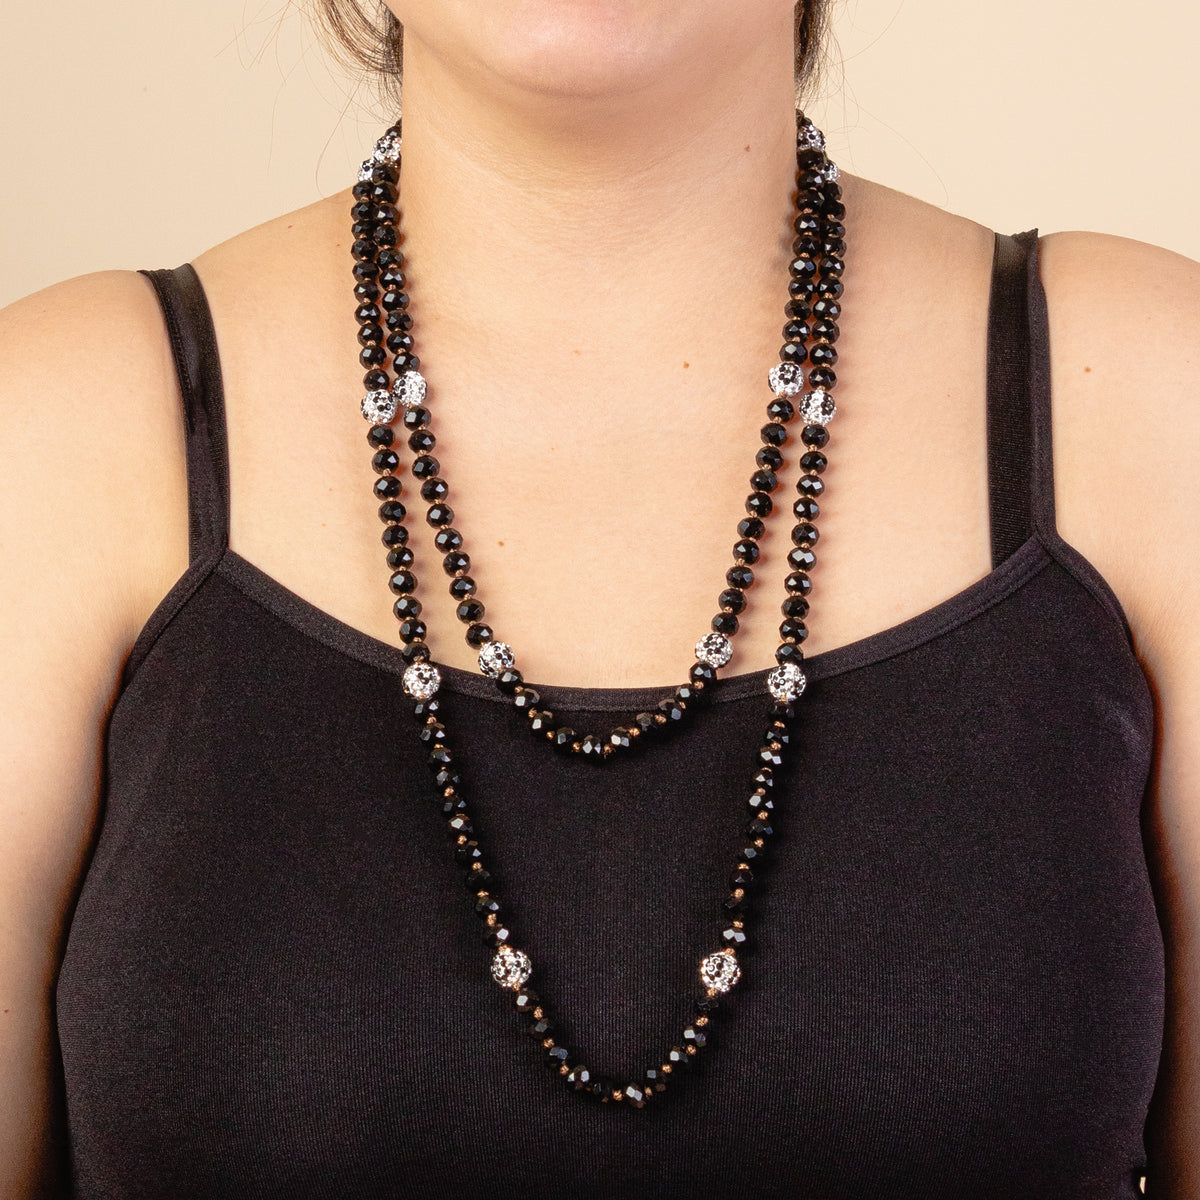 72503 - Crystal Beaded Necklace with Leopard Beads - Black & Silver